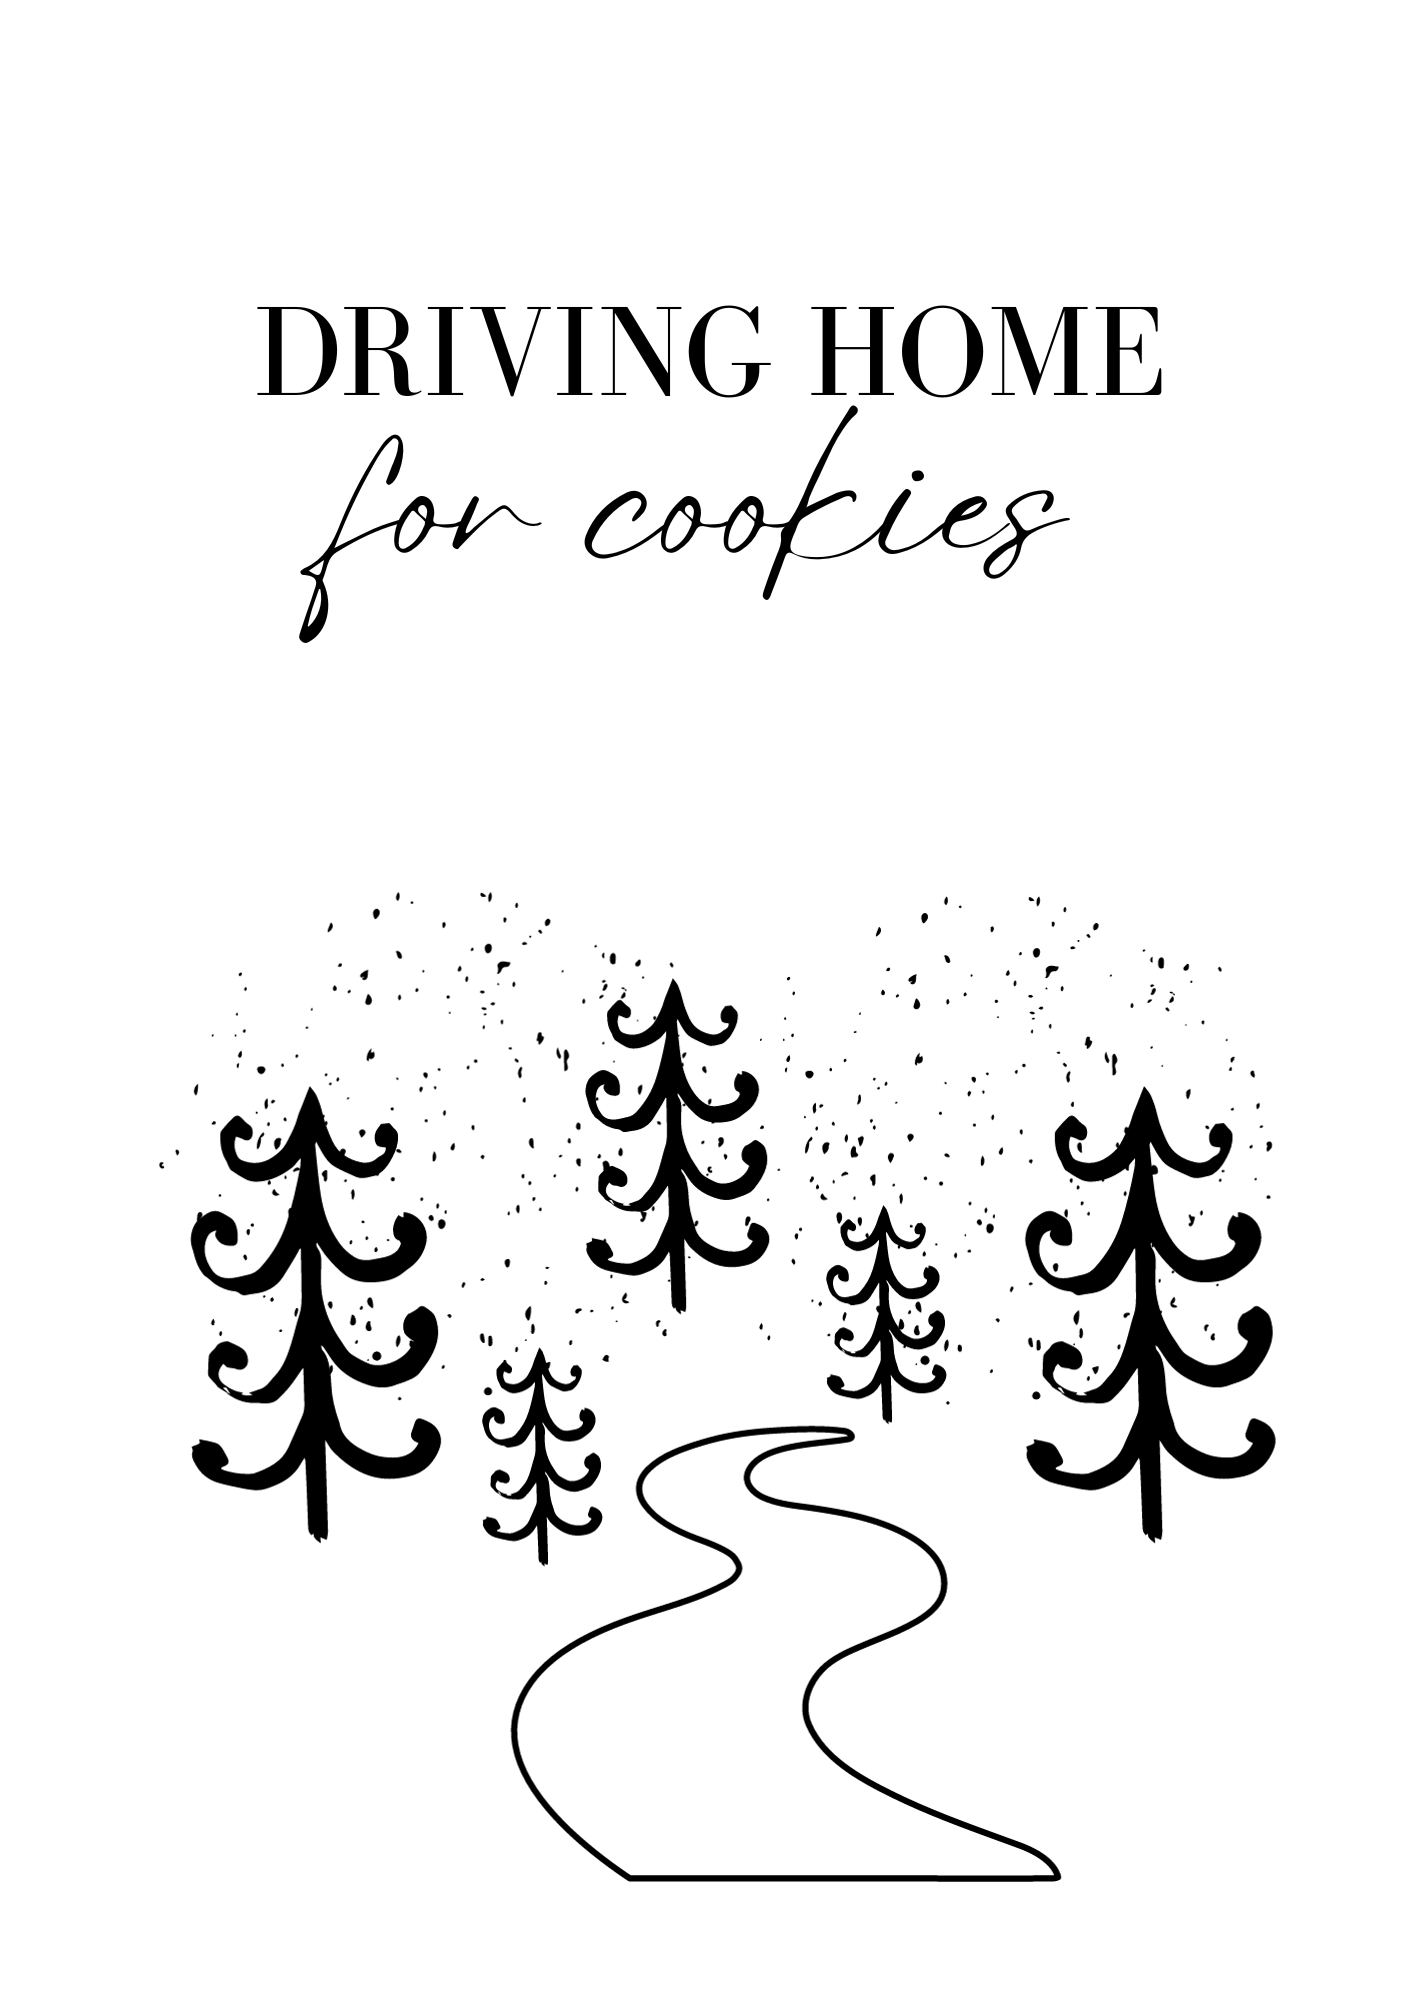 Driving Home for cookies - Christmas Poster Freebie zum Gratis Download